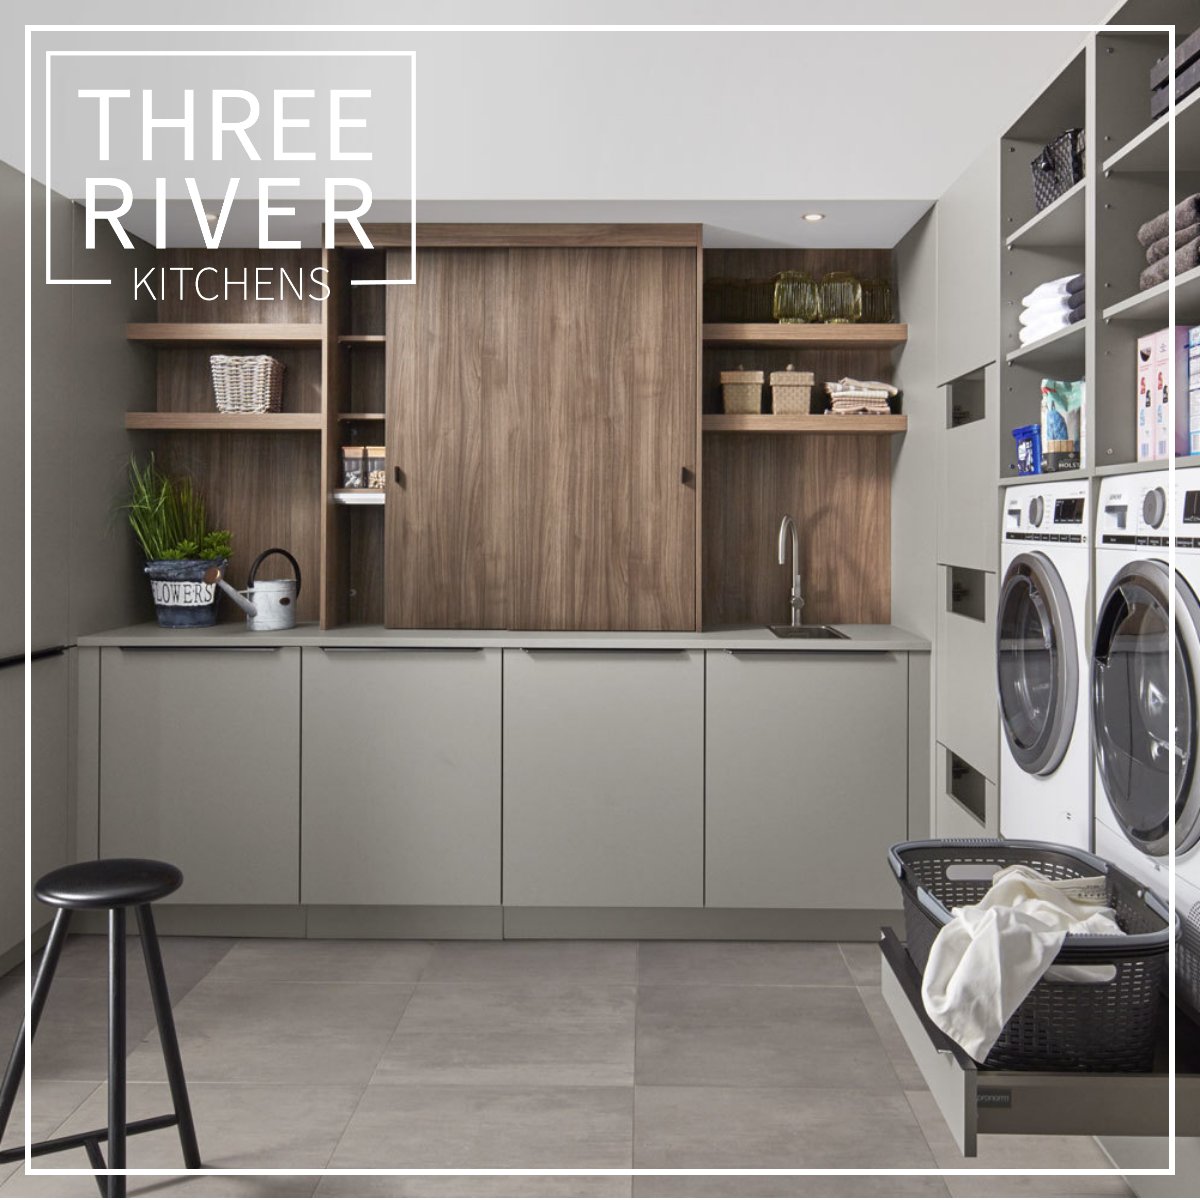 Maximize your home’s functionality with a custom utility room by Three River Kitchens. Book your design consultation now!   #utilityroomdesign #utilityroomideas  #kitchendesign #kitchenideas #kitchendesignideas #kitchendesigner